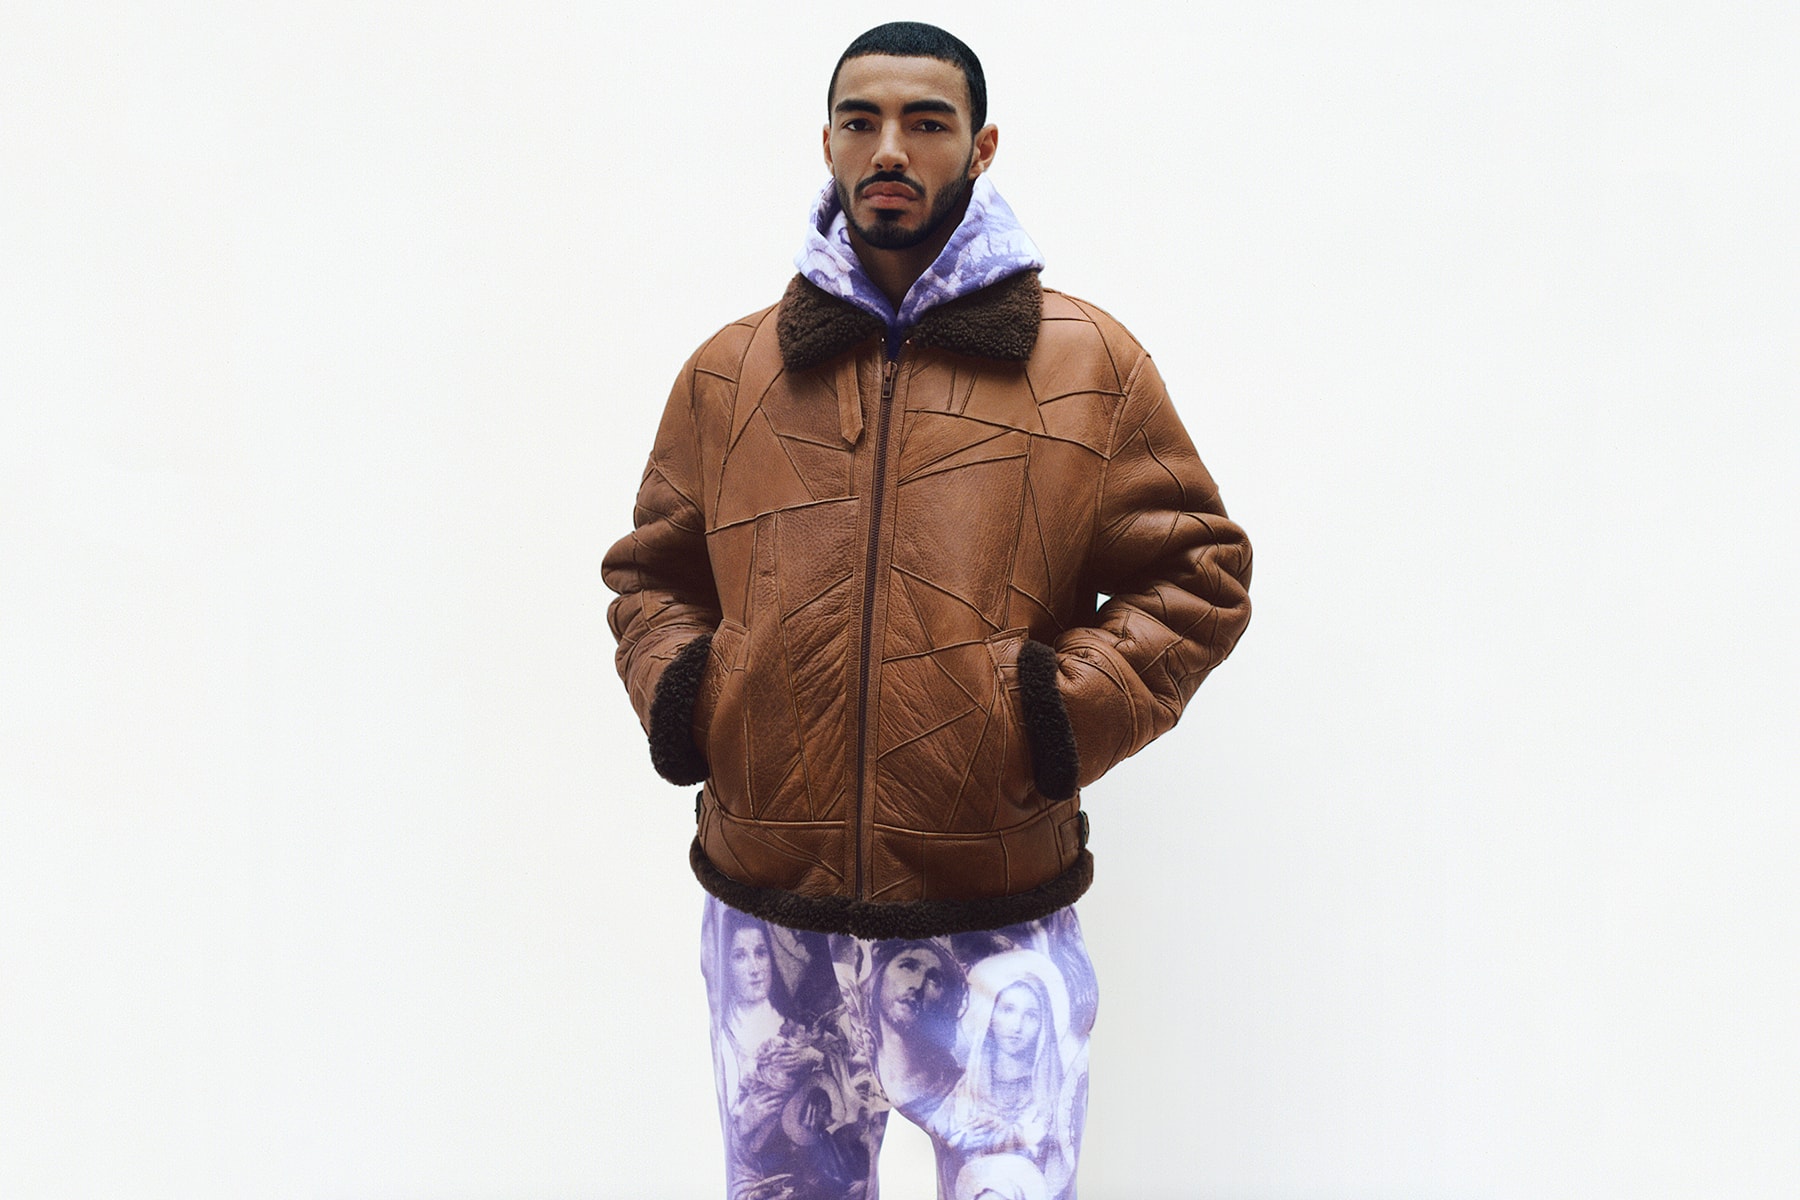 Supreme Launches Fall 2018 Collection With North Face